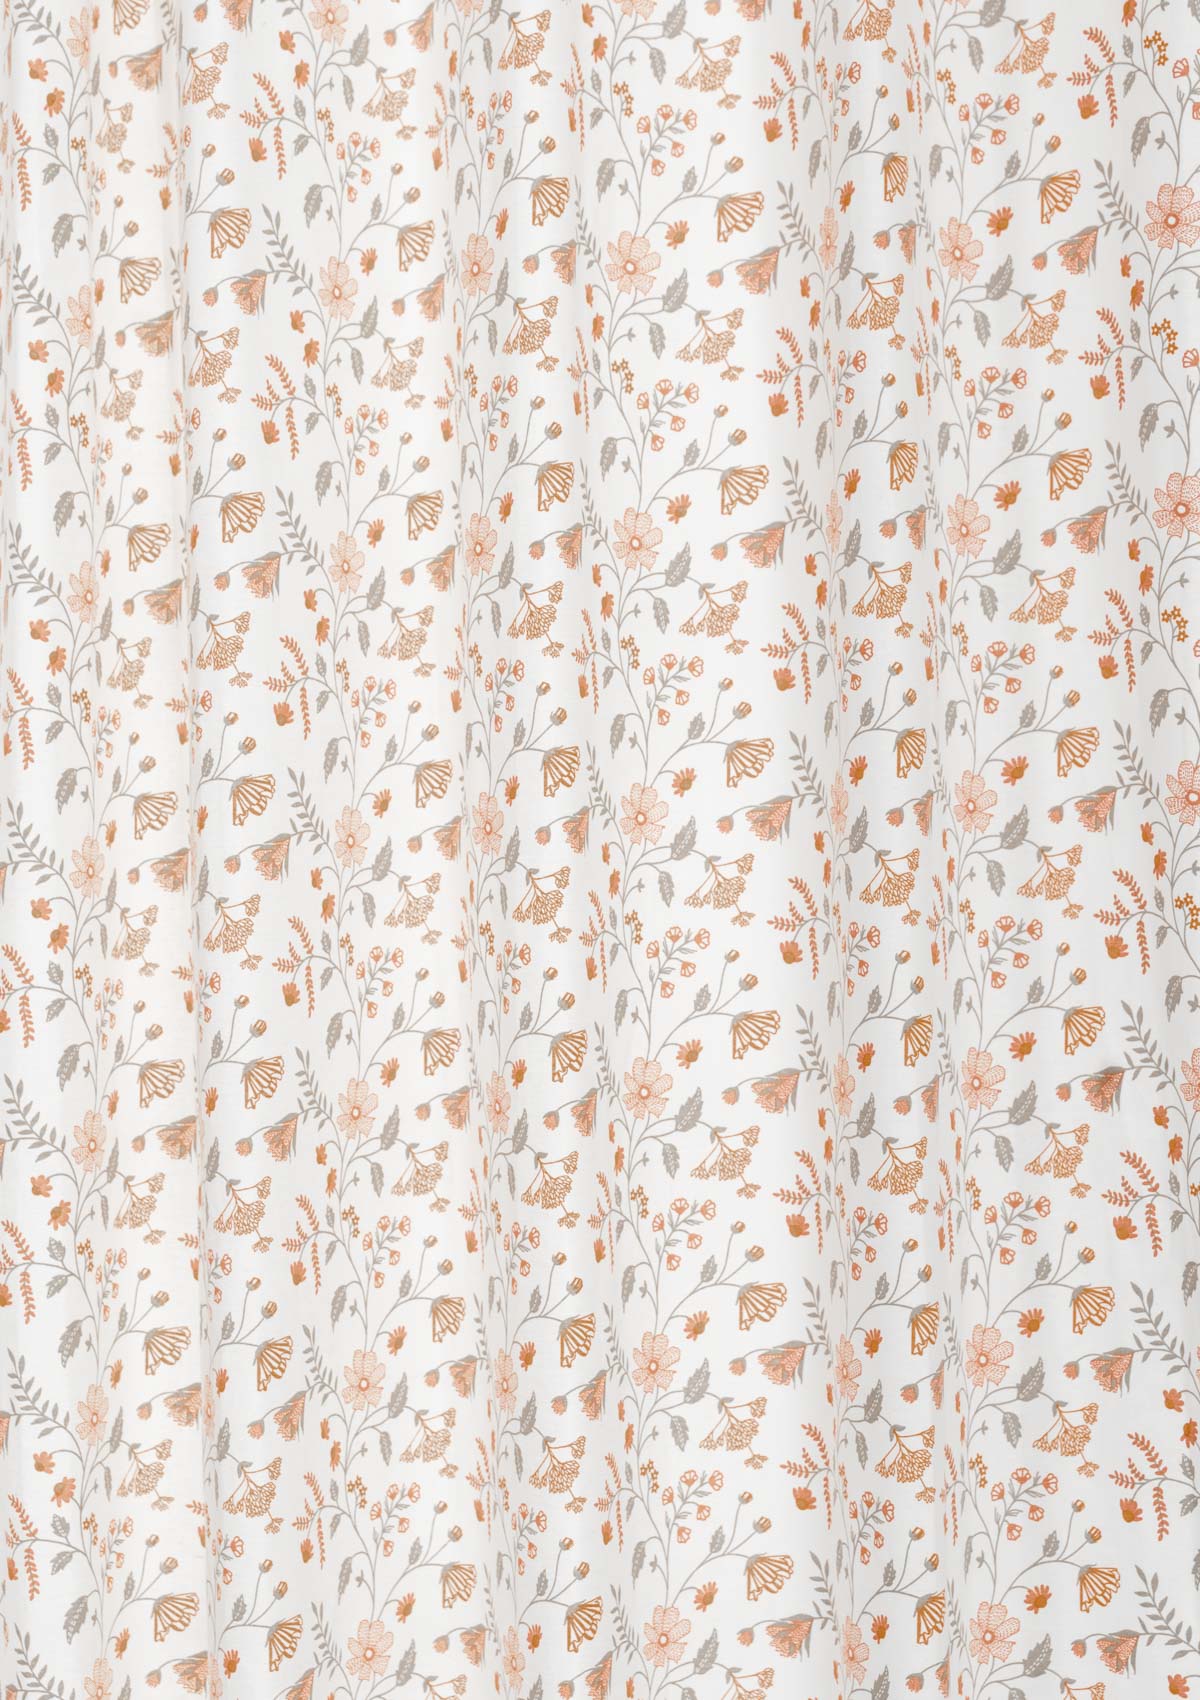 Forest bloom premium 100% cotton floral fabric for curtain, cushion cover, dining, blinds - Room darkening - Orange